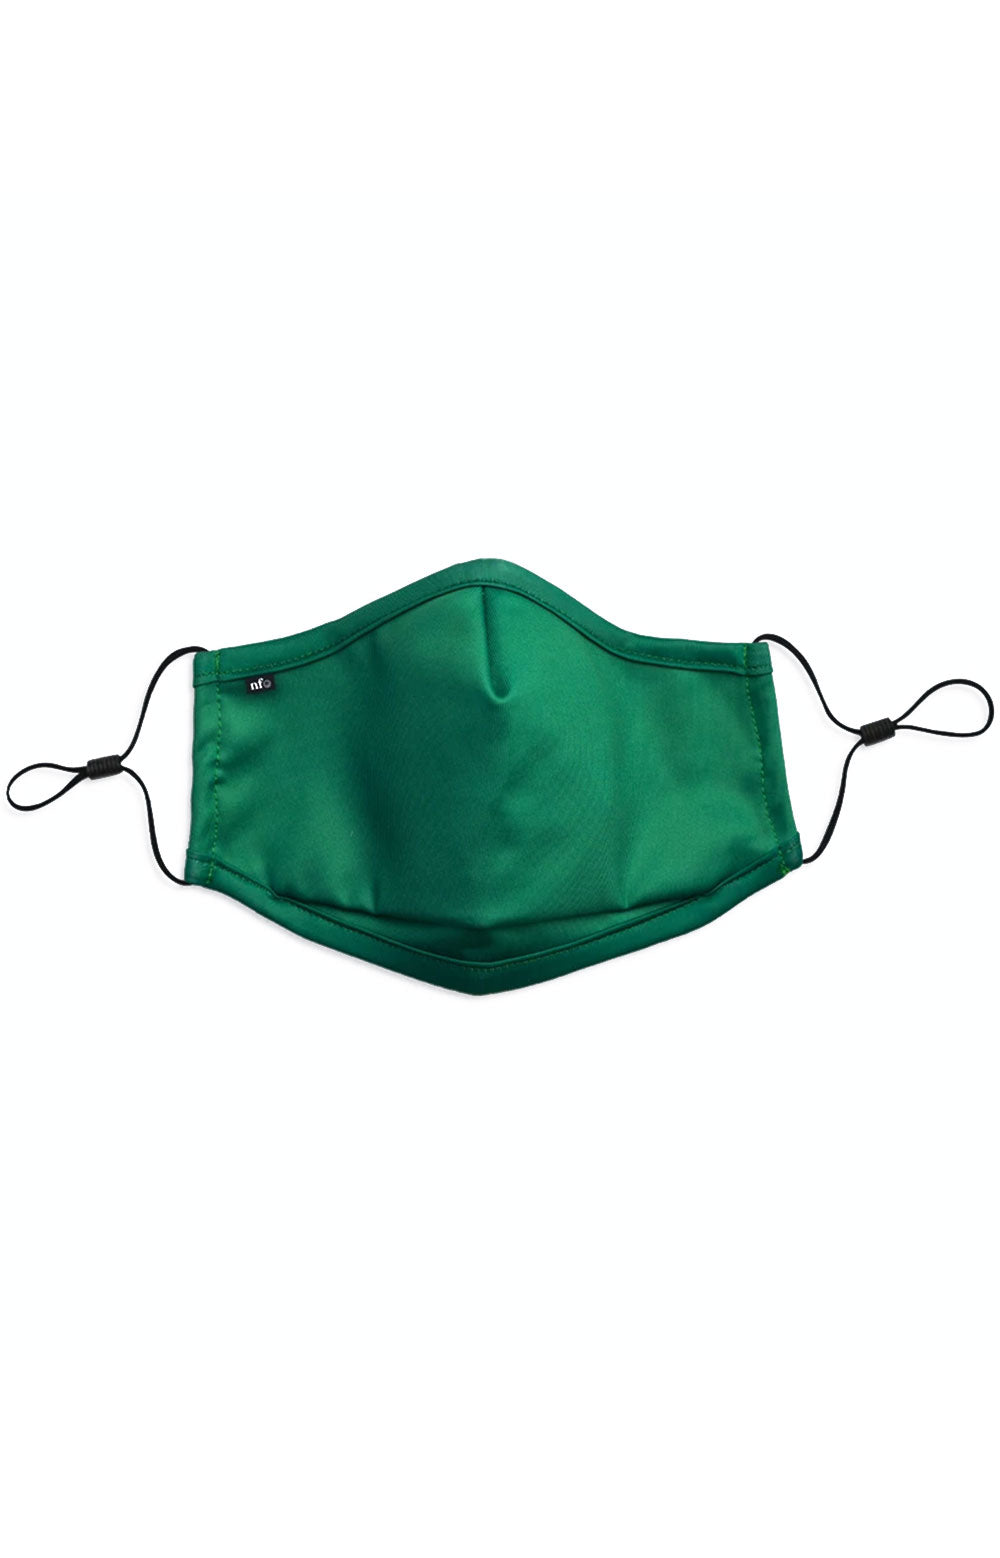 Kids Anti Bacterial Knit Face Mask - Green